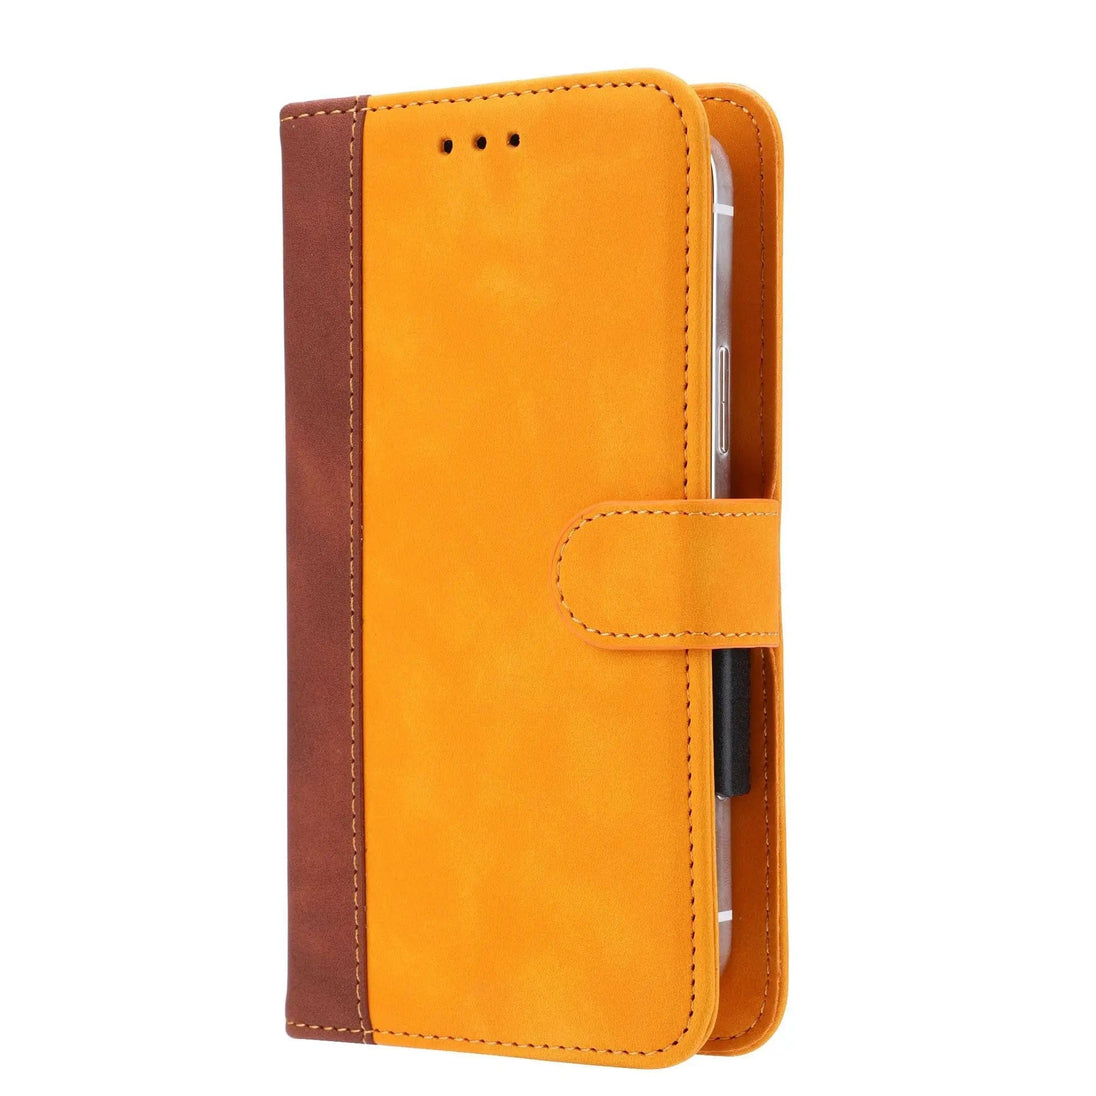 Secure Style Upgrade: Magnetic Flip Wallet with Credit Card Holder for Universal Smartphones